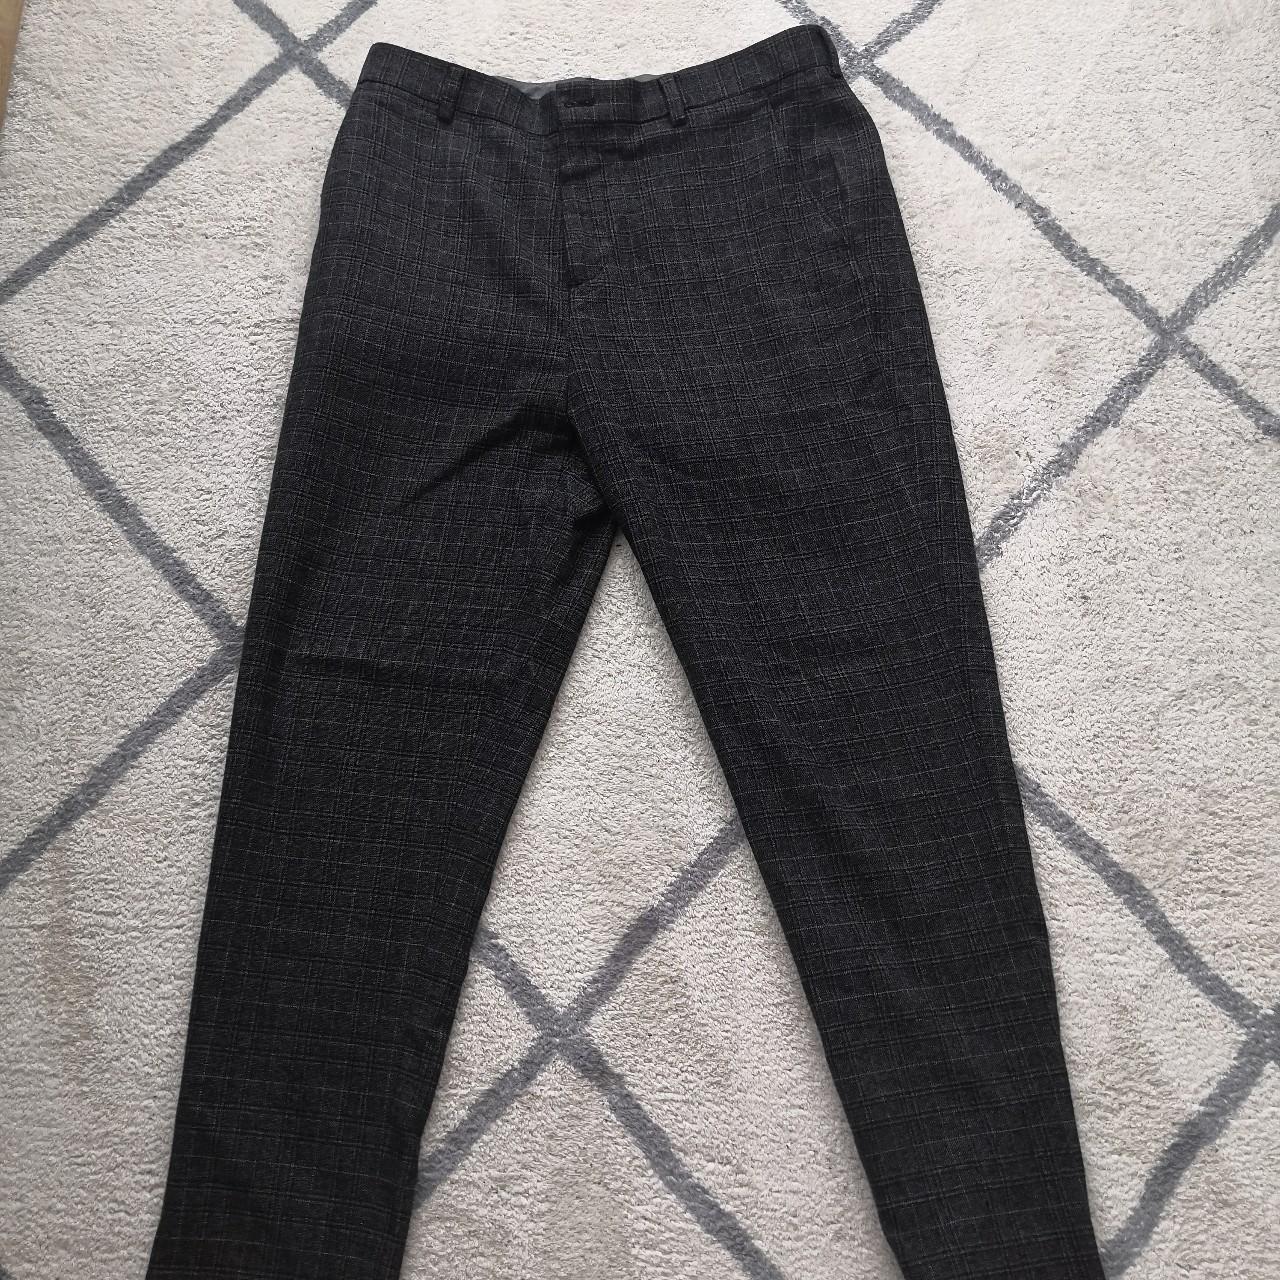 Zara suit trousers - Worn only once - Size: SMALL - Depop